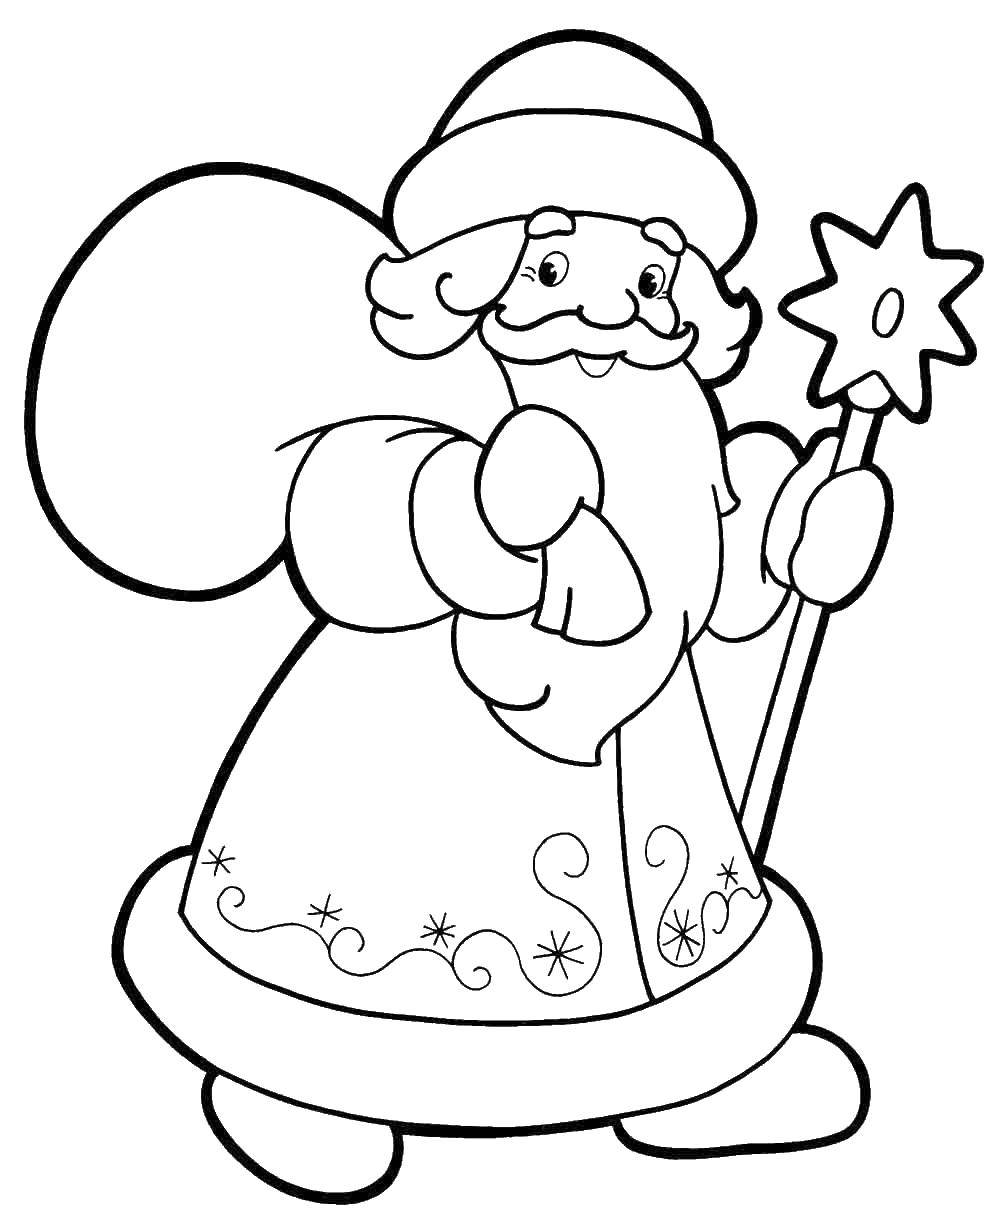 Coloring Santa Claus carries the gifts. Category Santa Claus. Tags:  New Year, Santa Claus, Santa Claus, gifts.